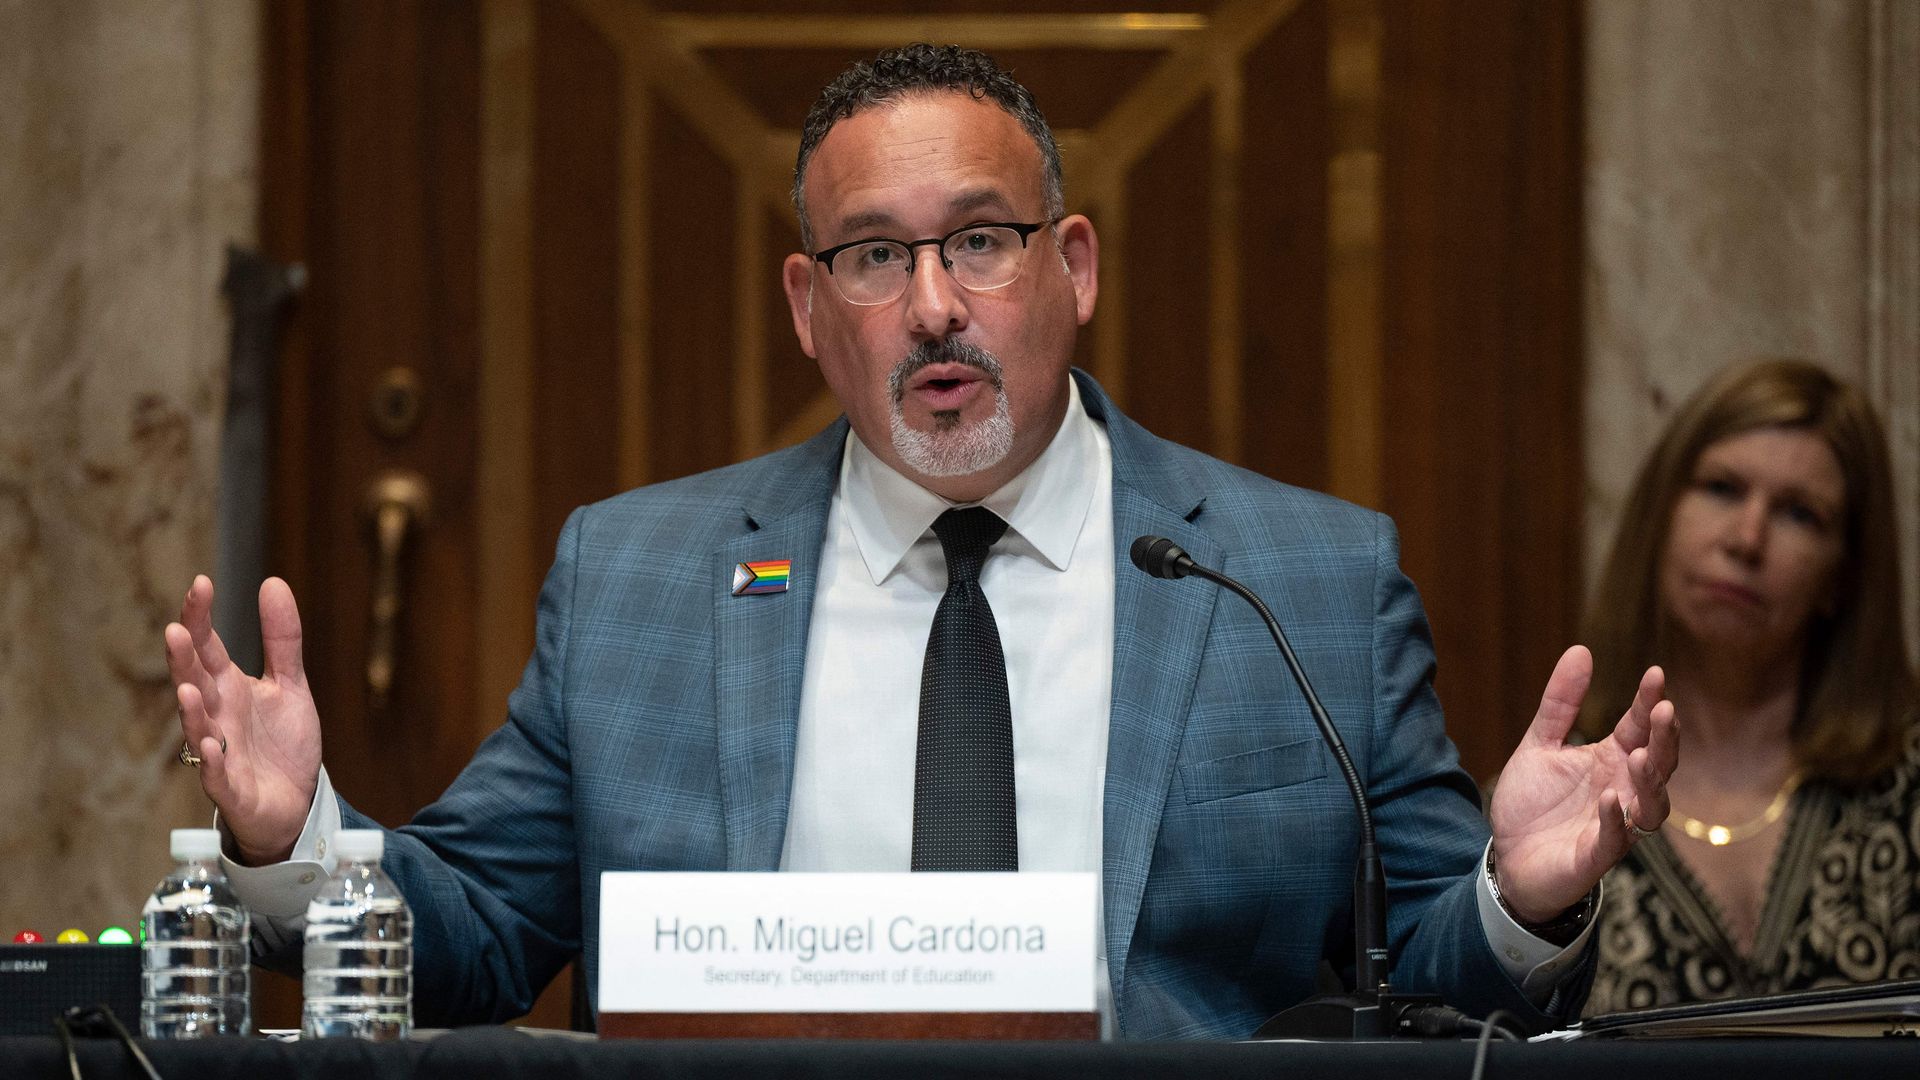 Education Secretary Miguel Cardona is seen speaking during a congressional hearing.